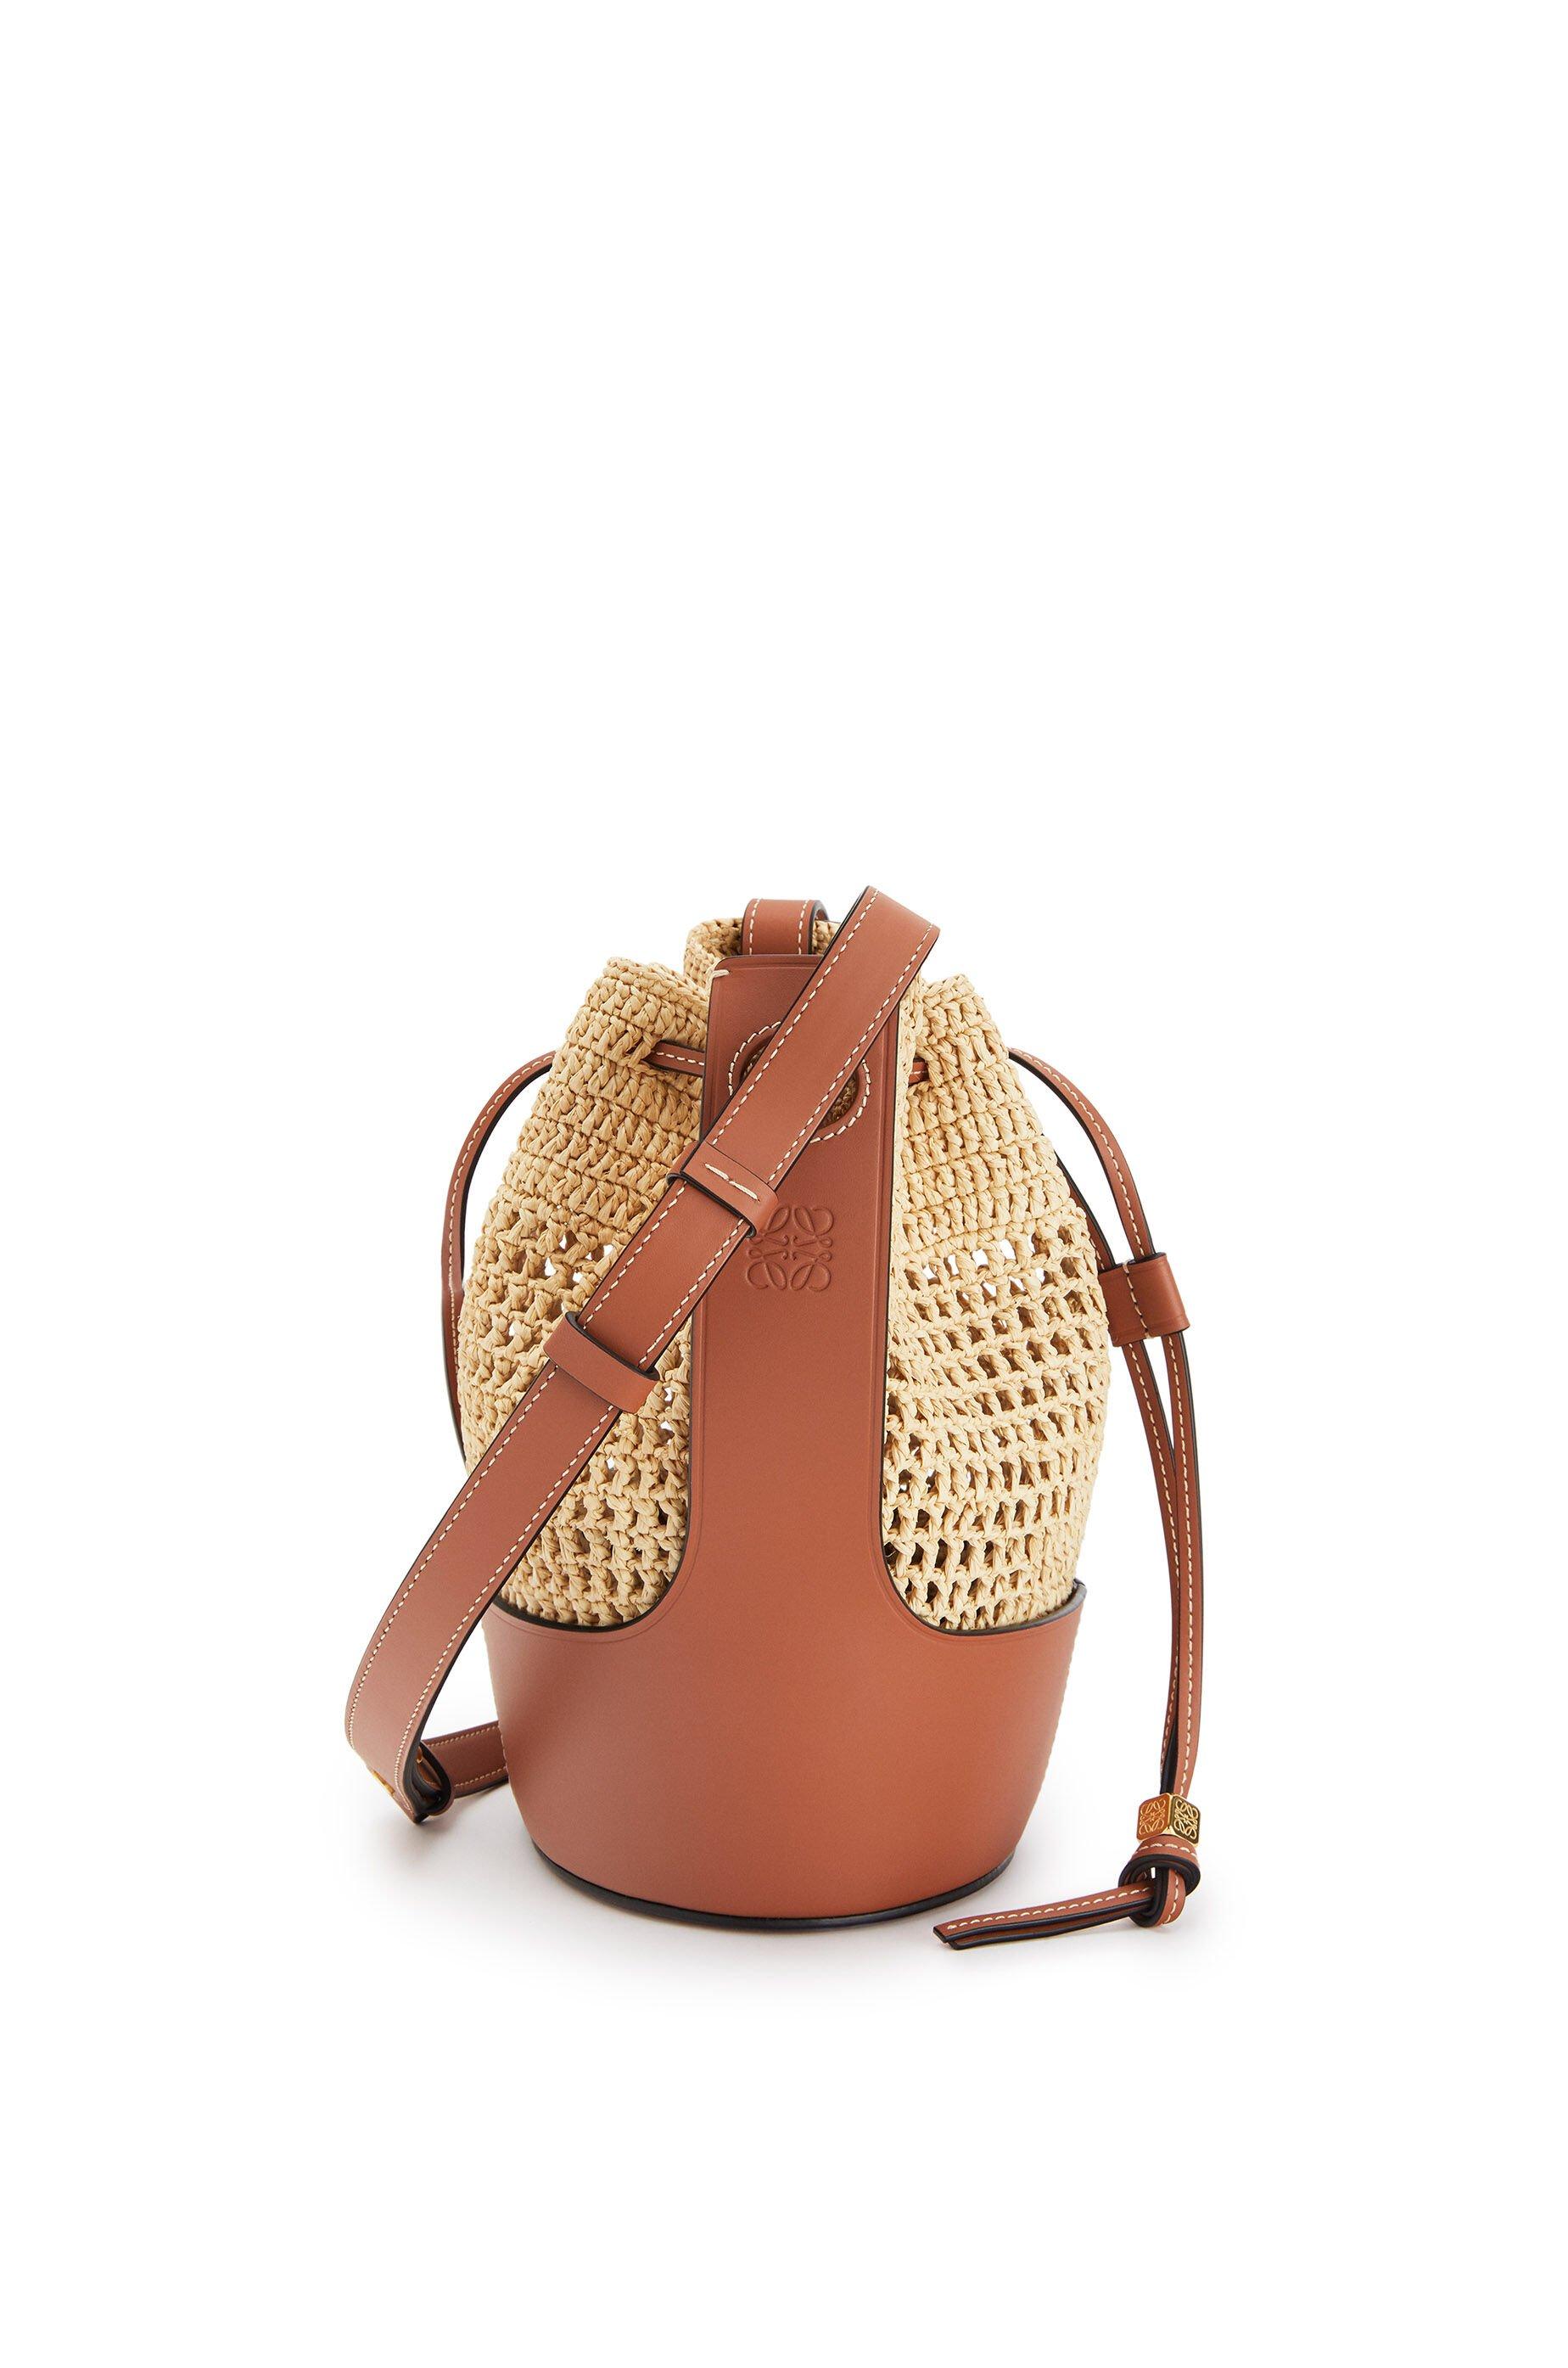 Loewe Balloon Small Leather And Raffia Shoulder Bag | Lyst